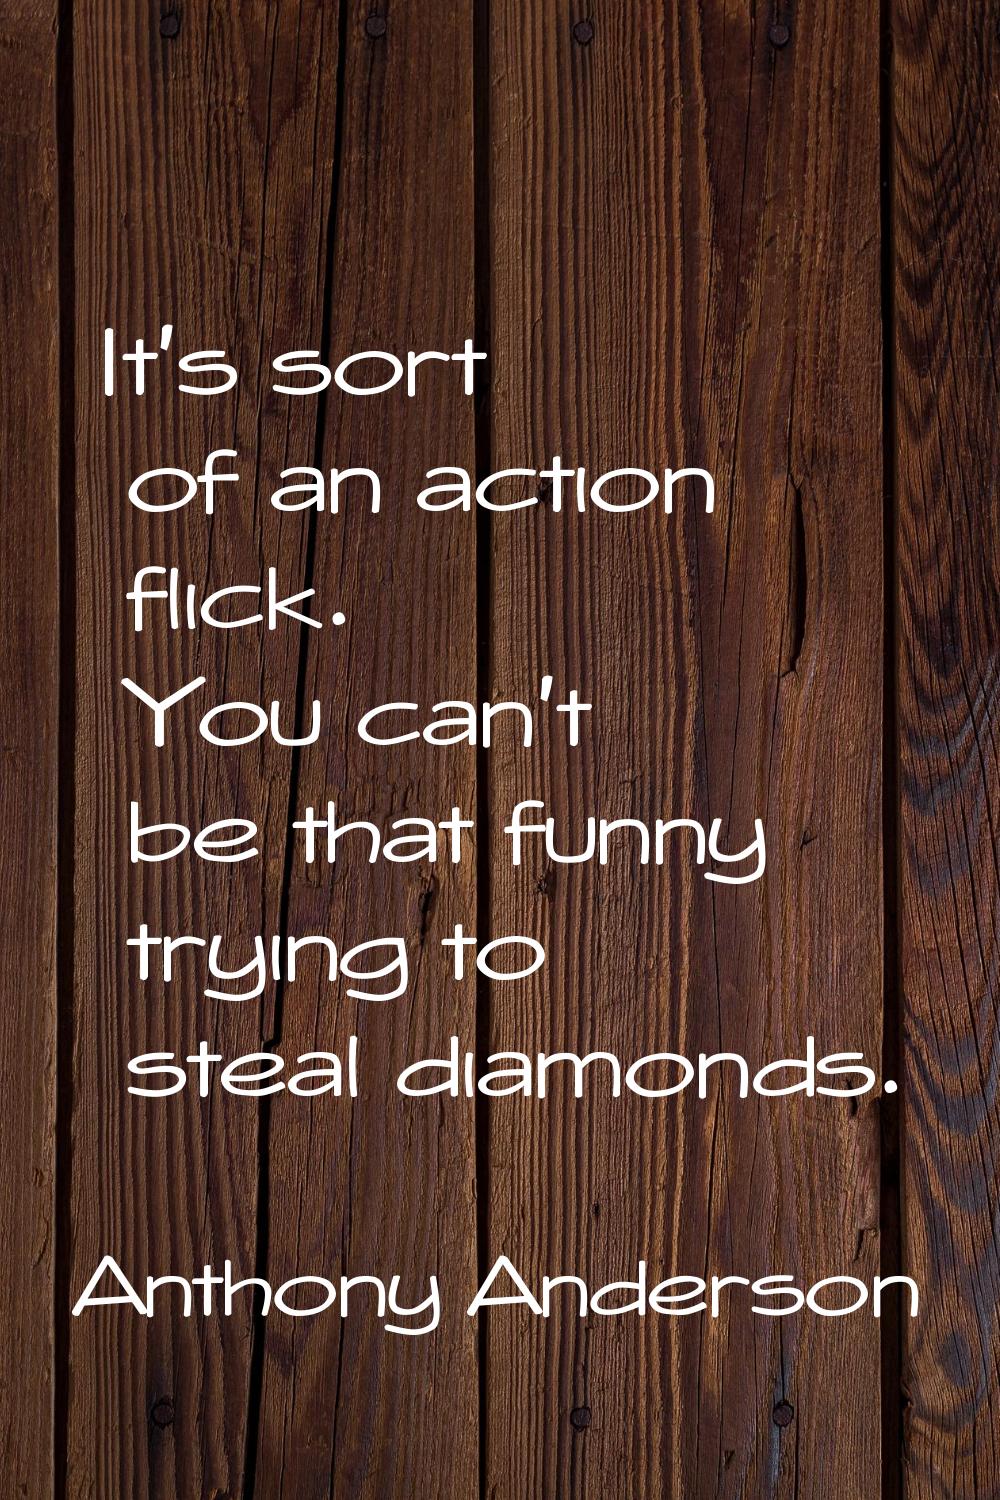 It's sort of an action flick. You can't be that funny trying to steal diamonds.